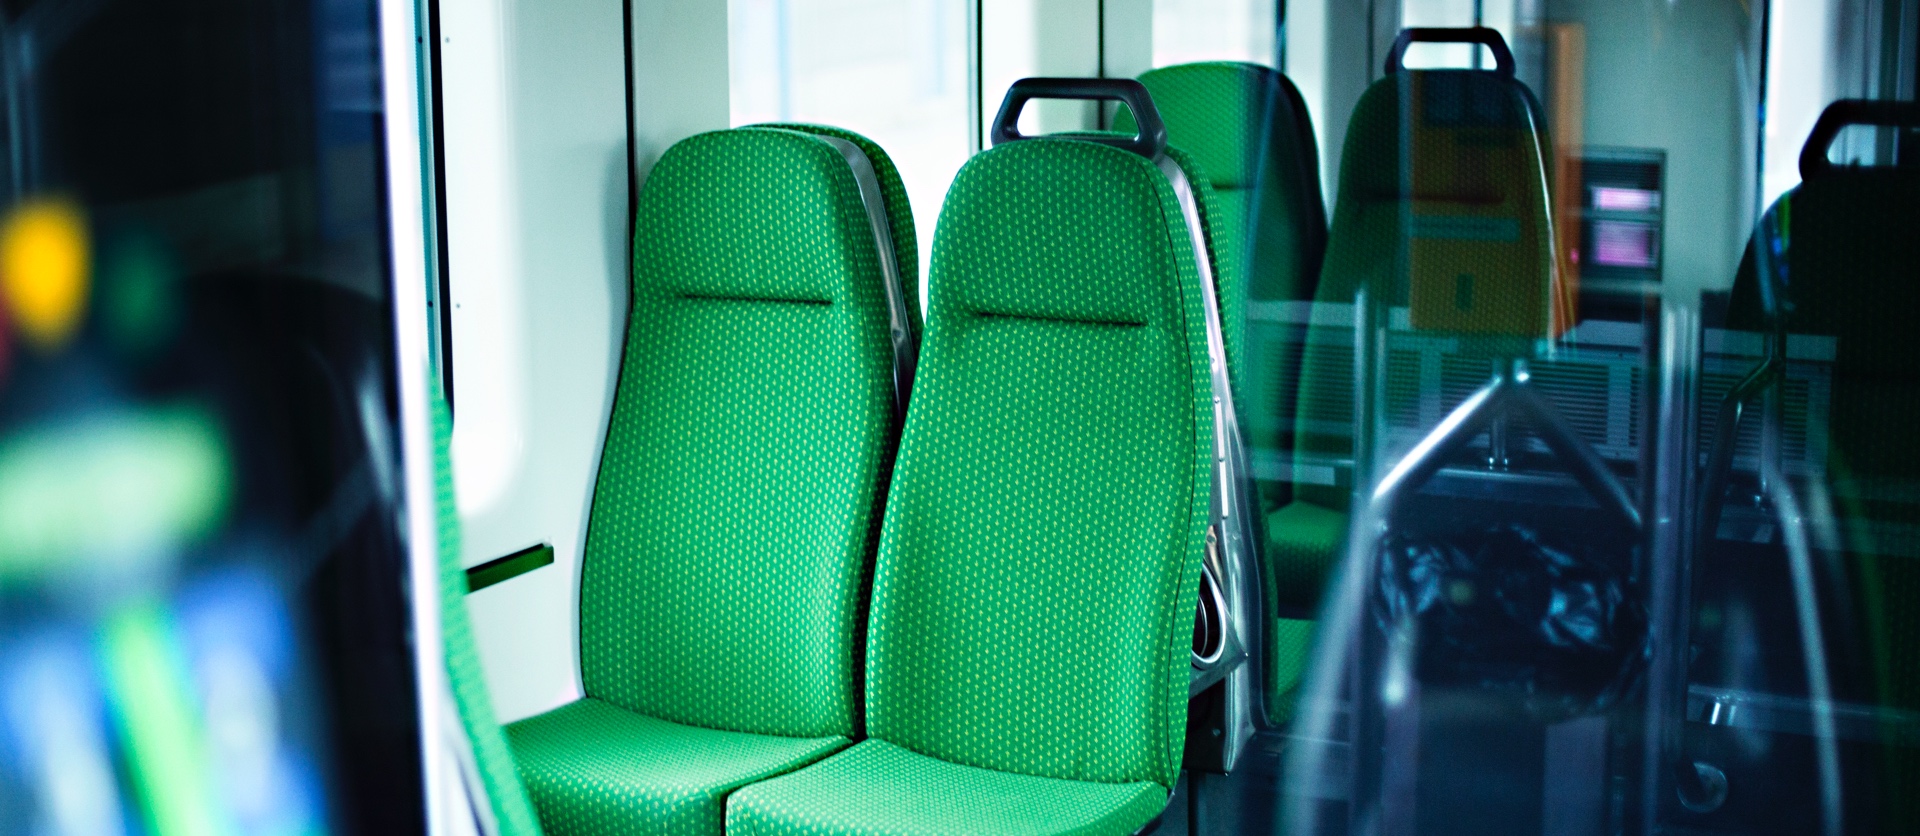 On board many commuter trains there are two seats on either side of the centre aisle.